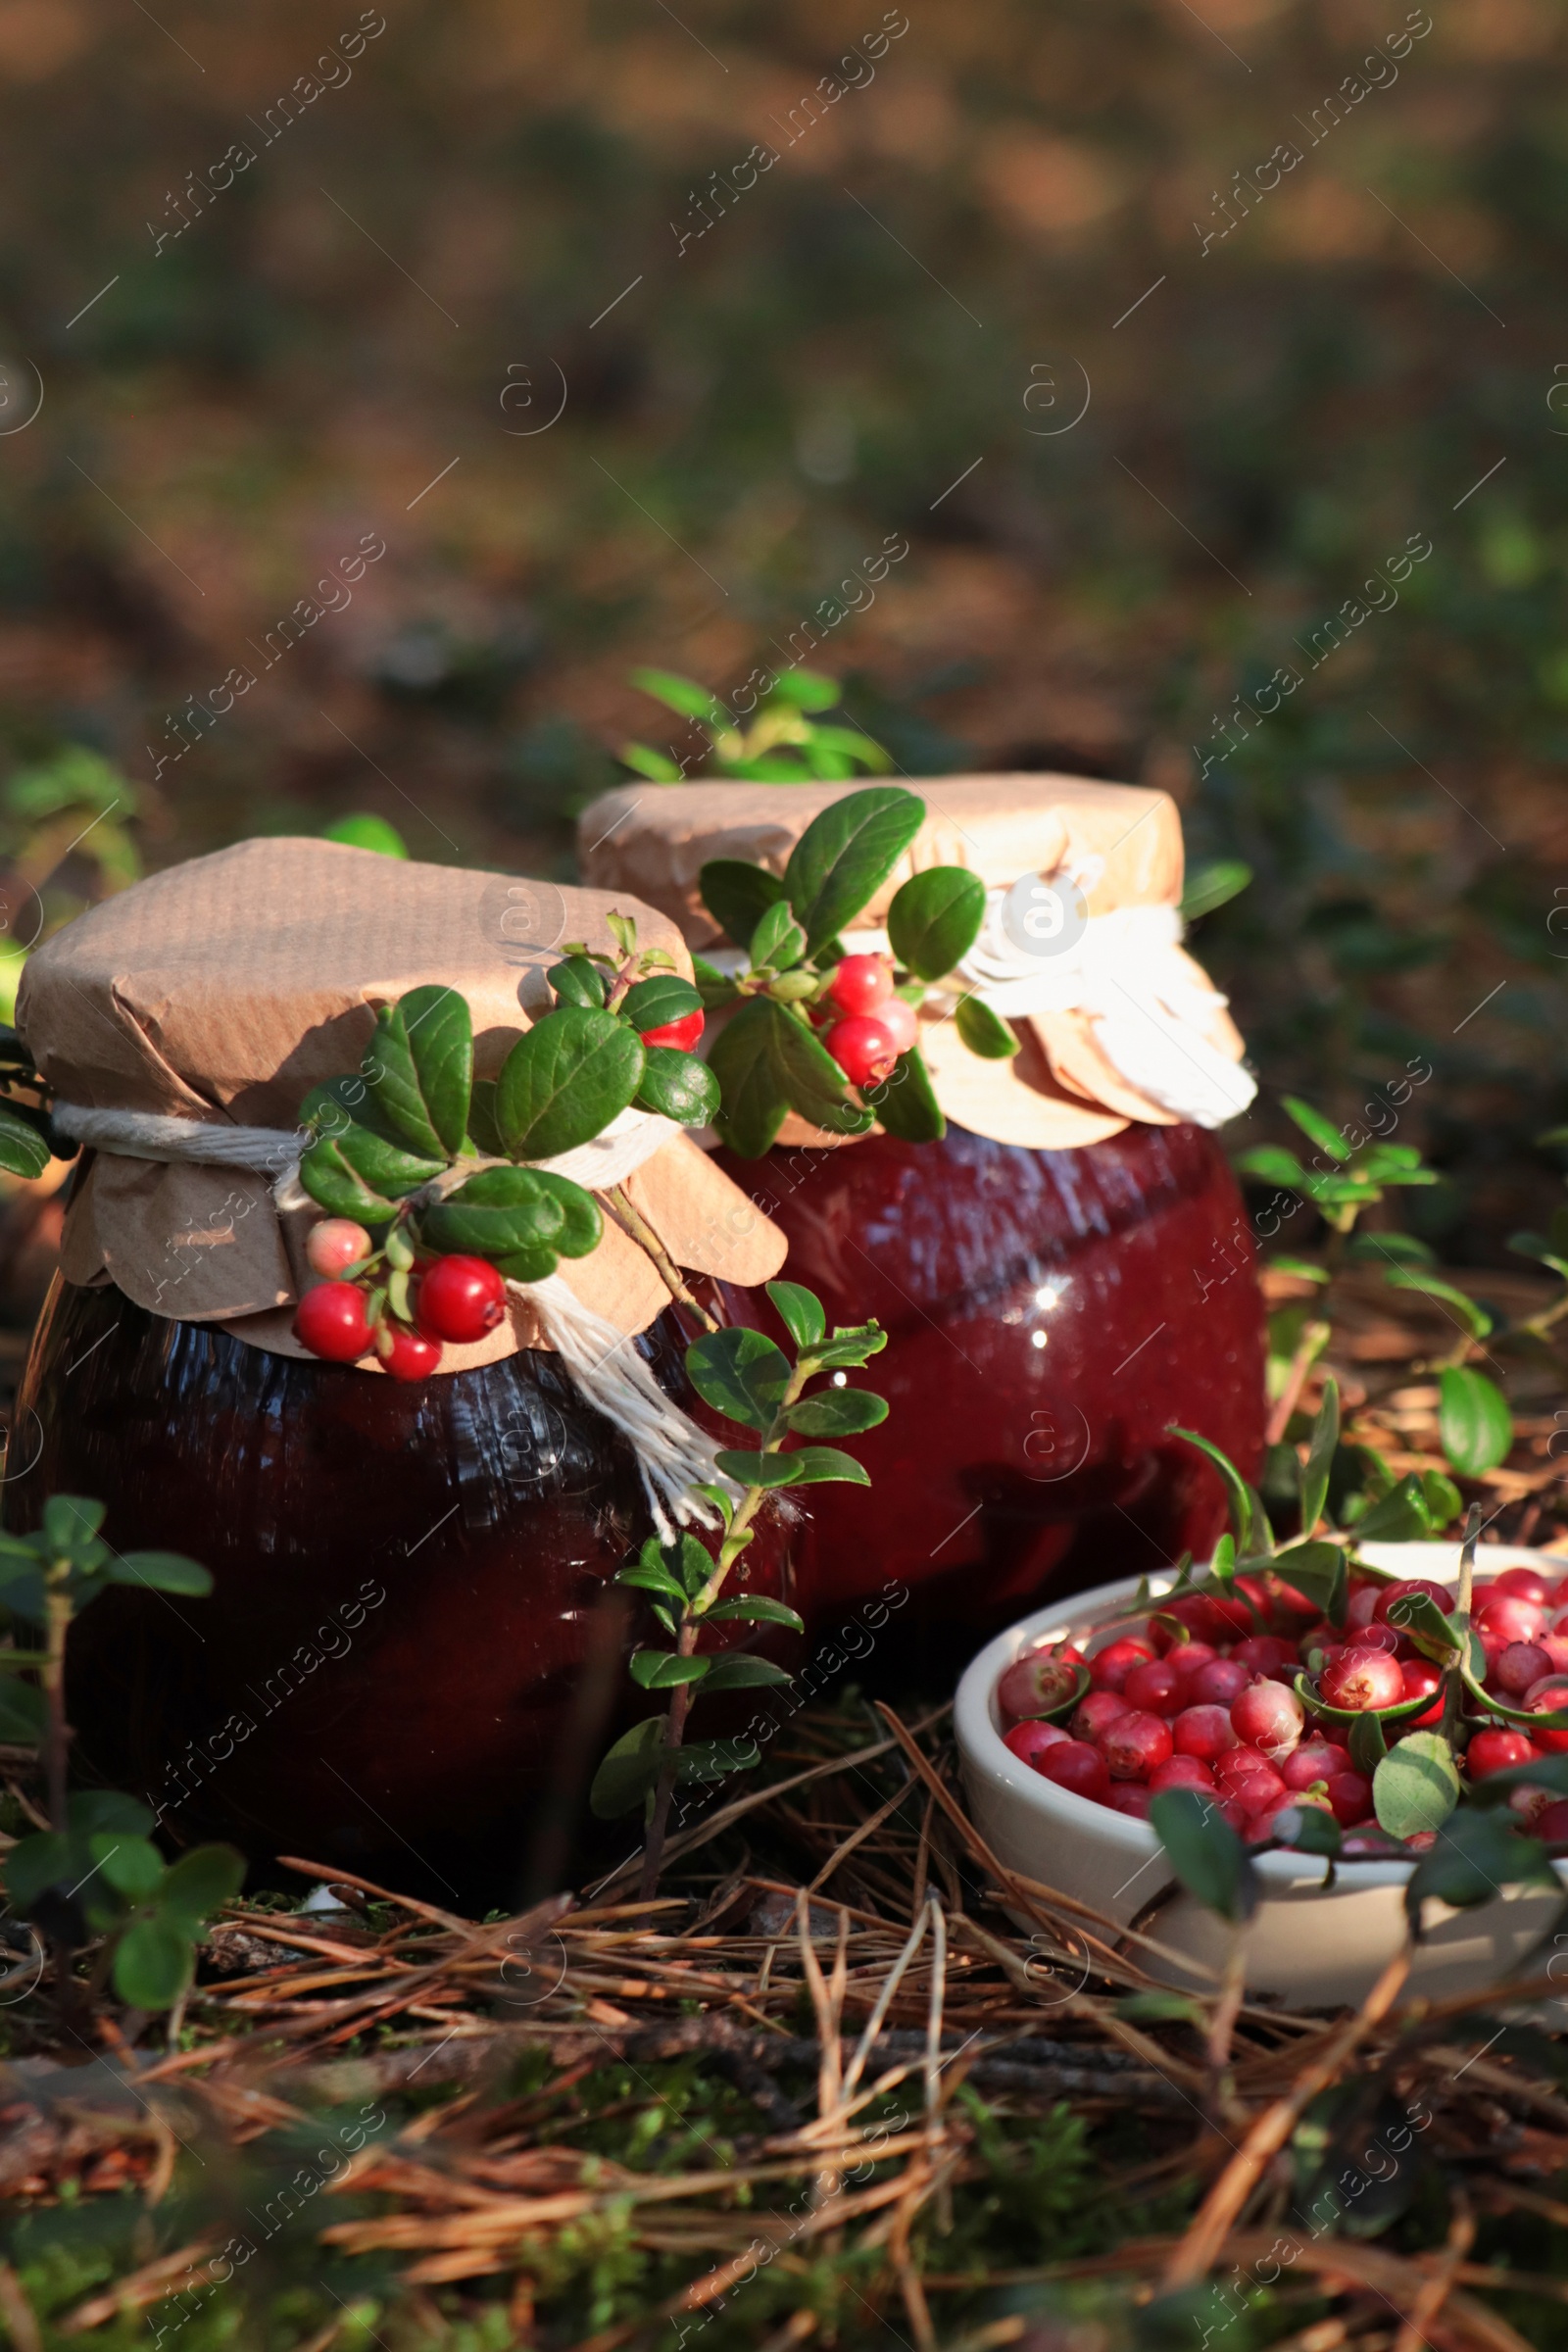 Photo of Jars of delicious lingonberry jam and red berries outdoors